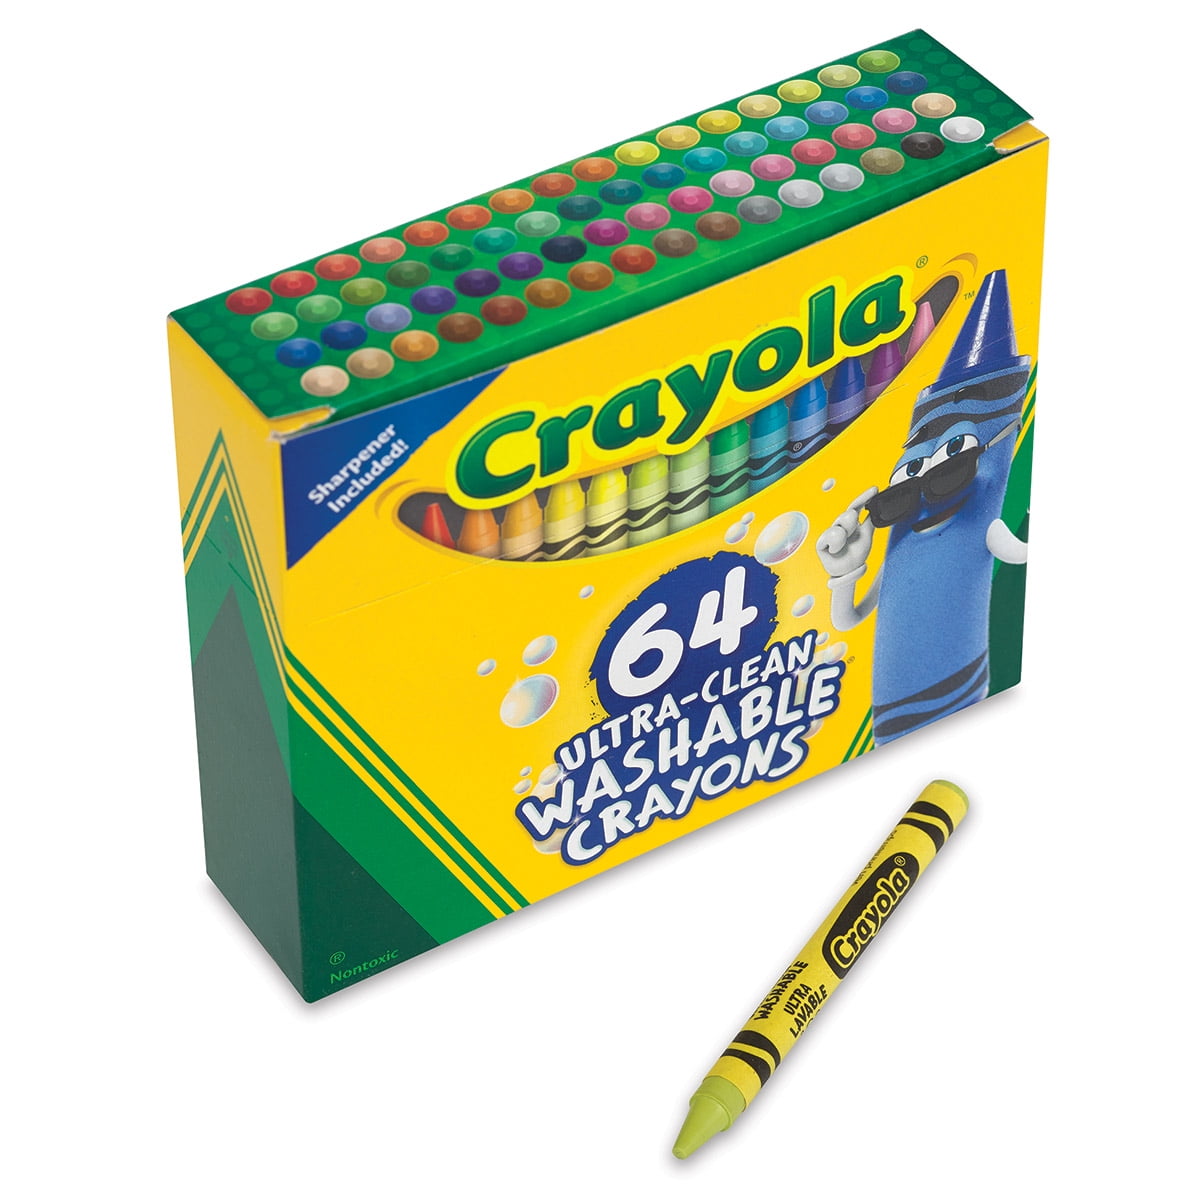  Crayola Ultra Clean Washable Crayons, Large Crayons for Toddlers,  16 Count, Gifts for Kids : Toys & Games